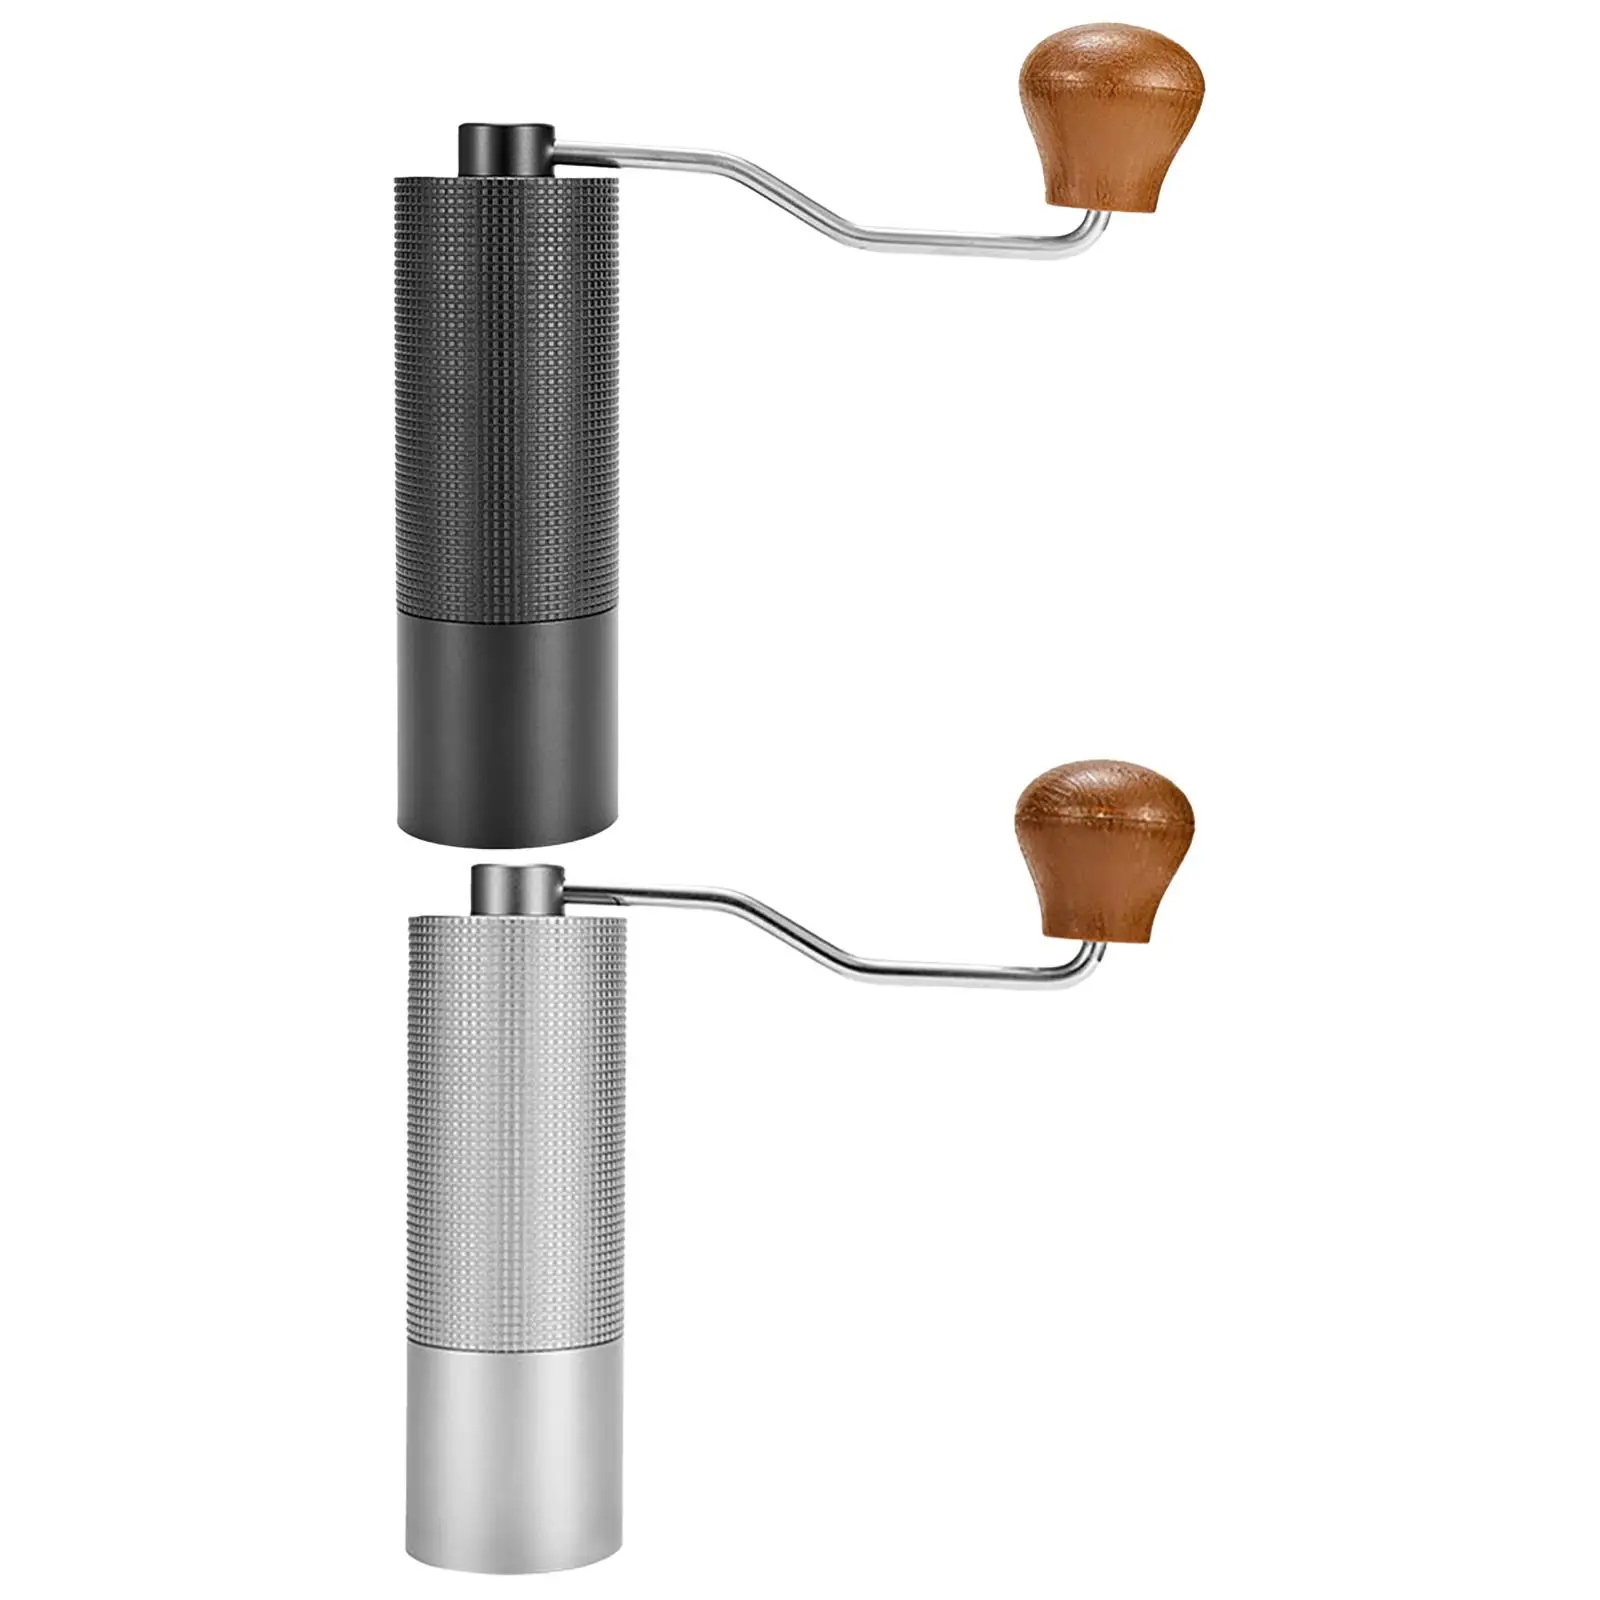 Professional Manual Coffee Grinder Adjustable Knob Easy to Clean Durable for Travel